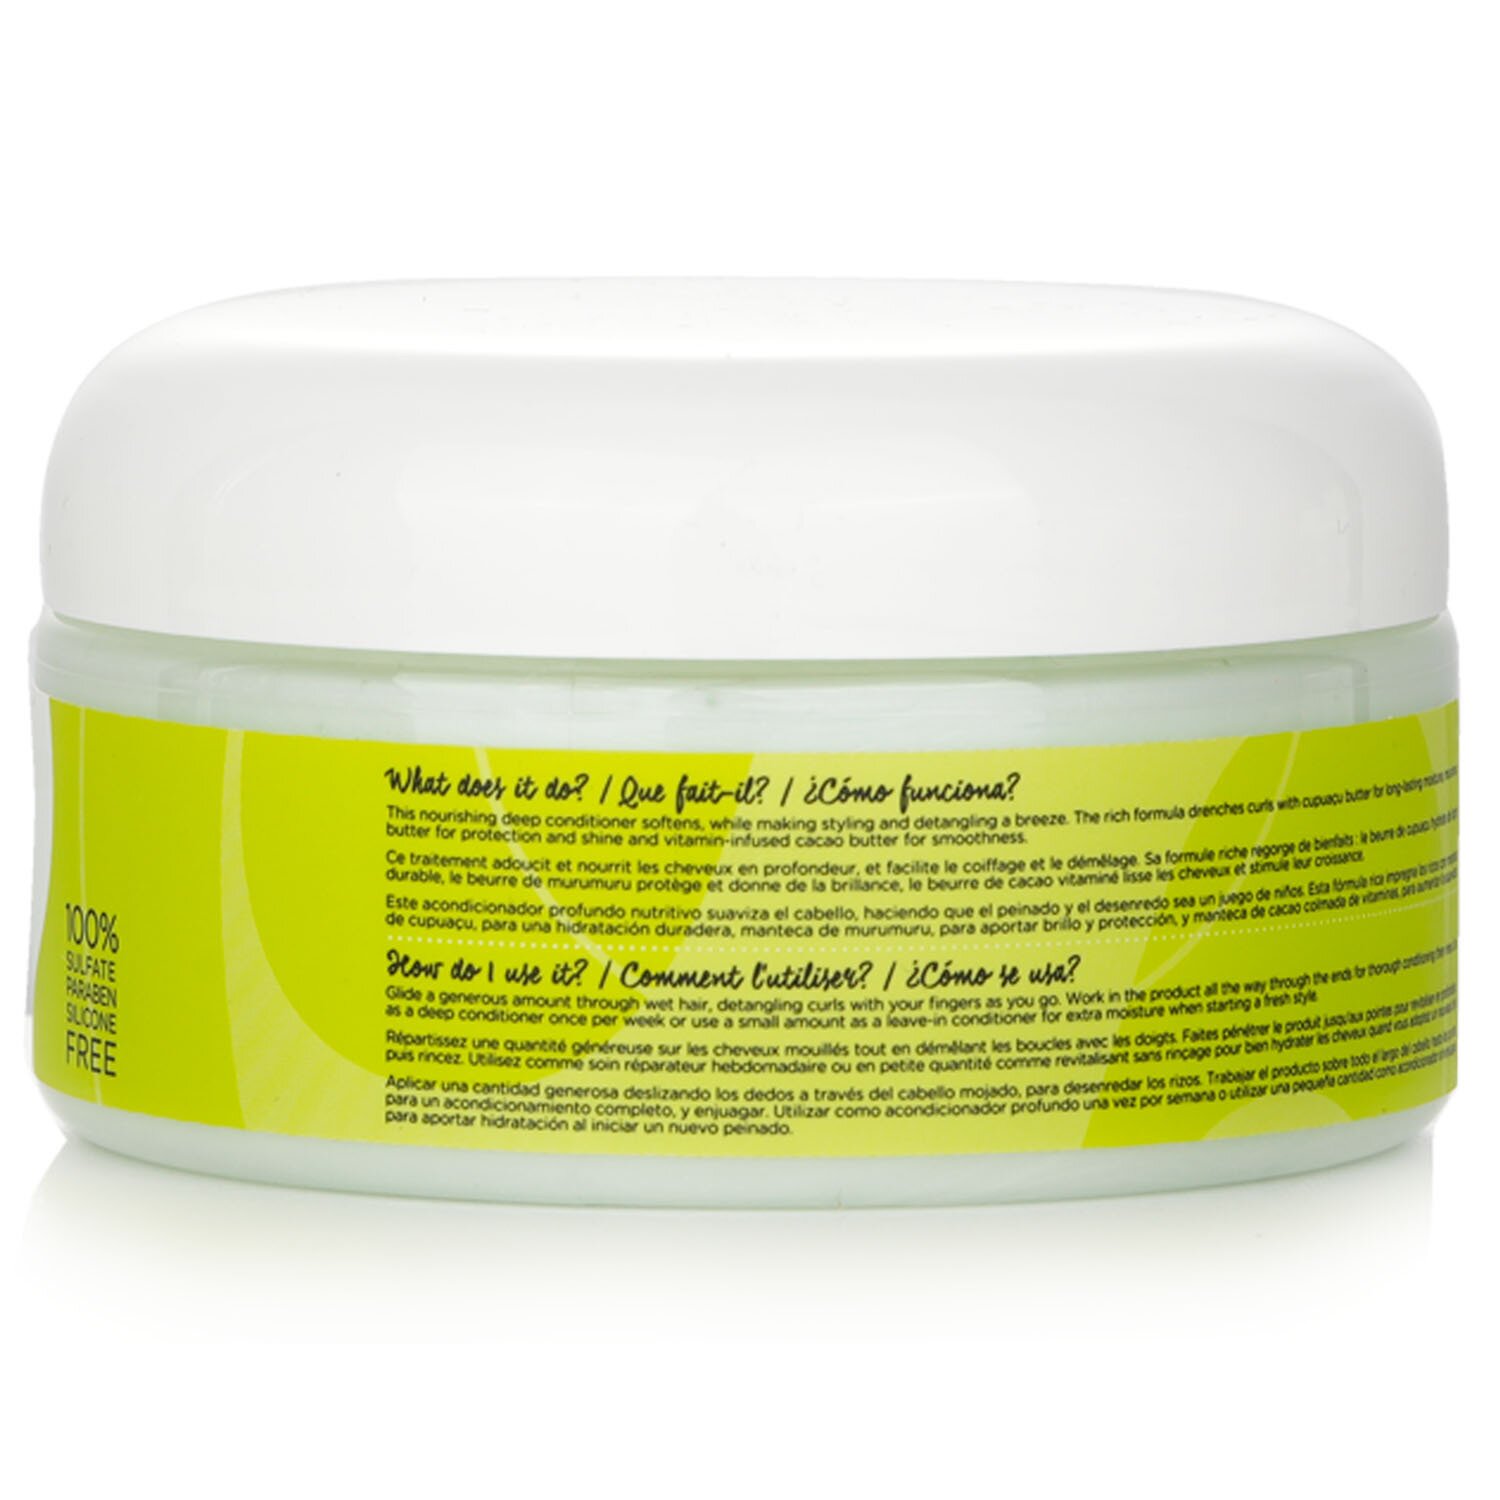 DevaCurl Heaven In Hair (Divine Deep Conditioner - For All Curl Types) 236ml/8oz